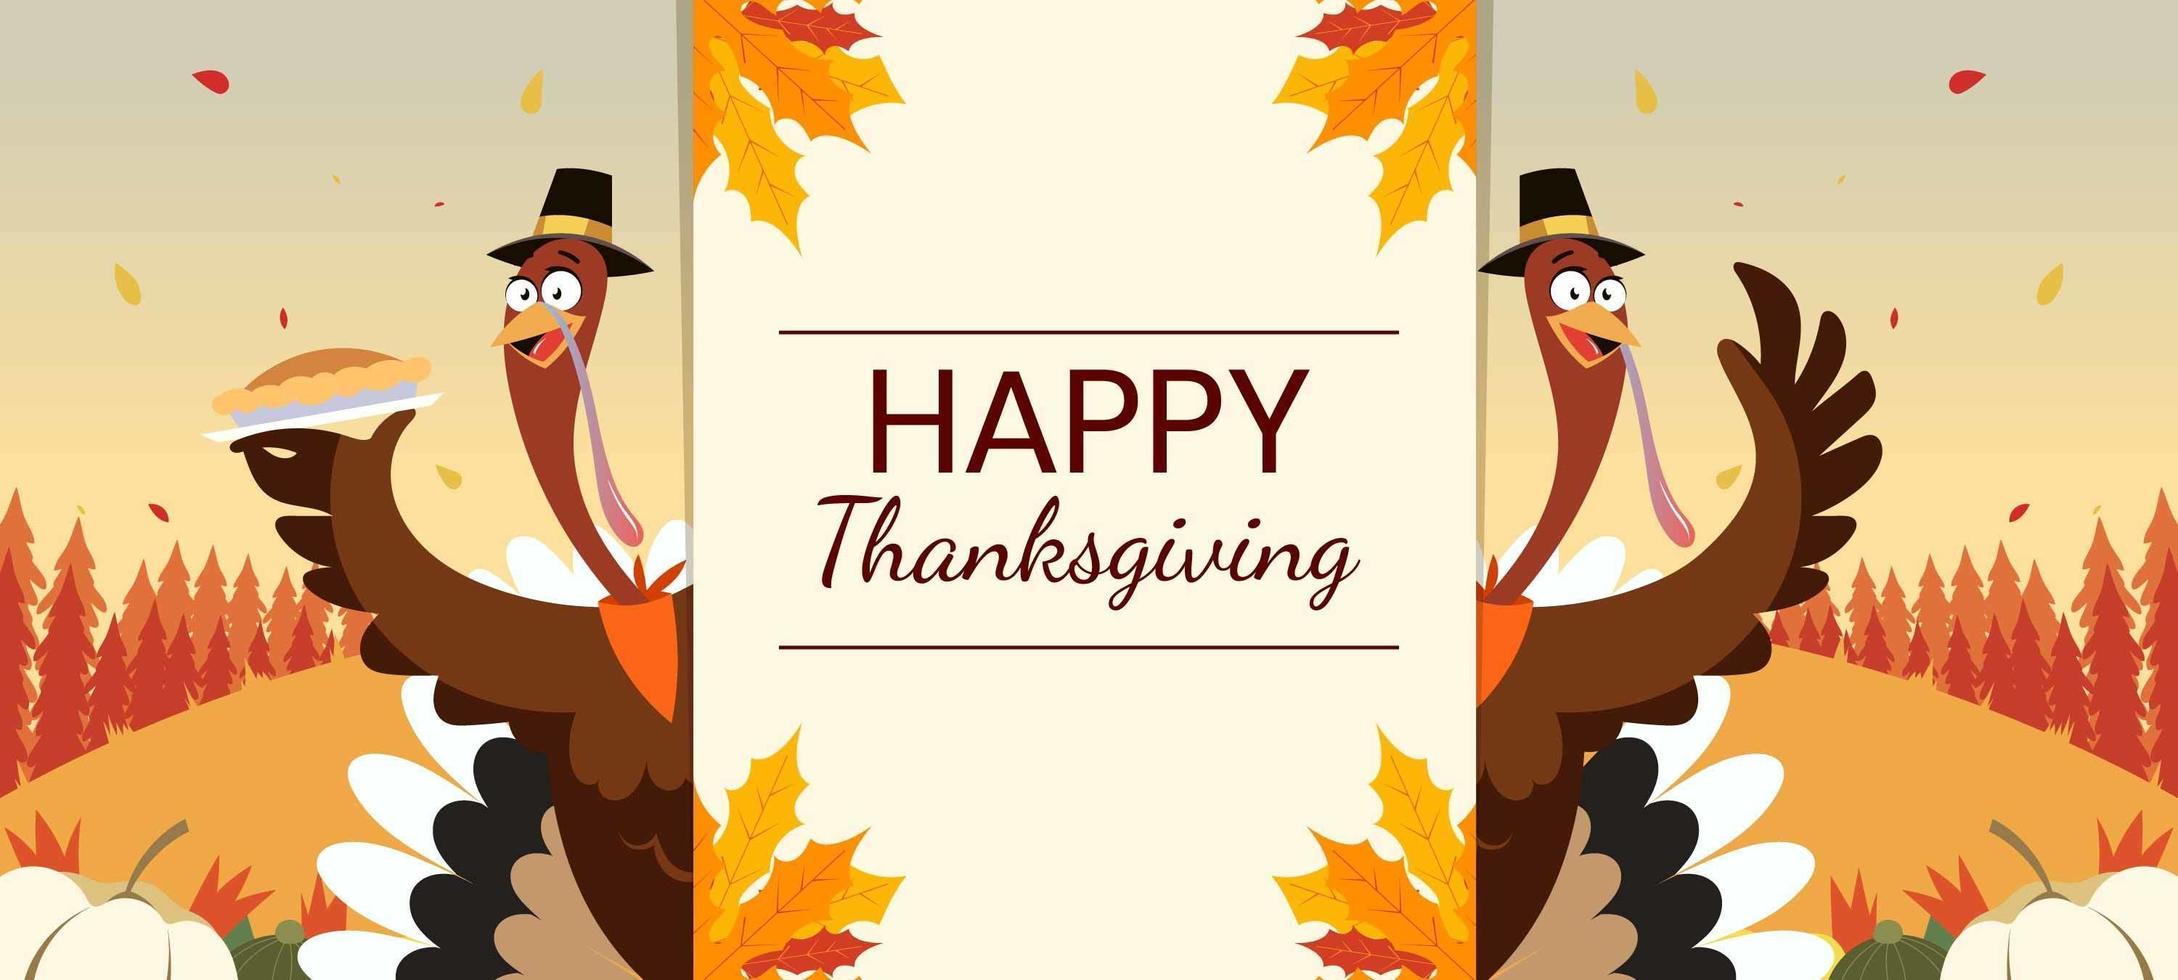 Happy Thanksgiving Celebration with Turkey and Pie 1372987 Vector Art ...